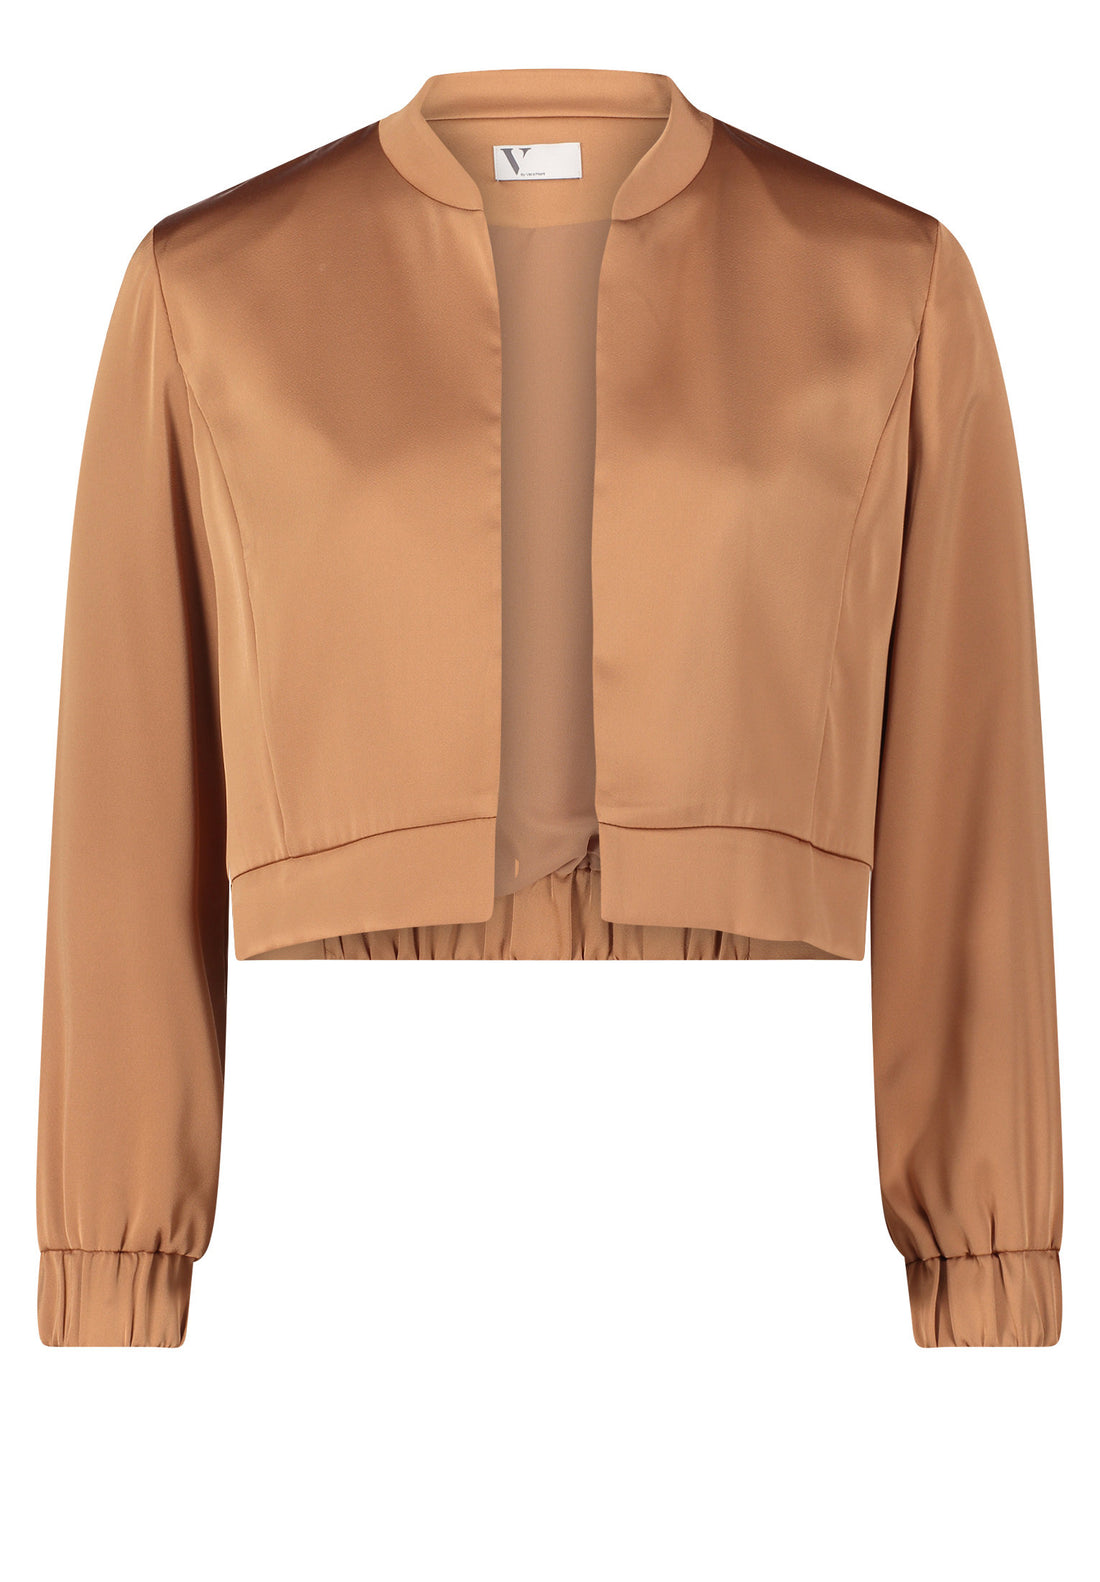 Cropped Bomber Jacket With No Closures_0305 4262_7125_01